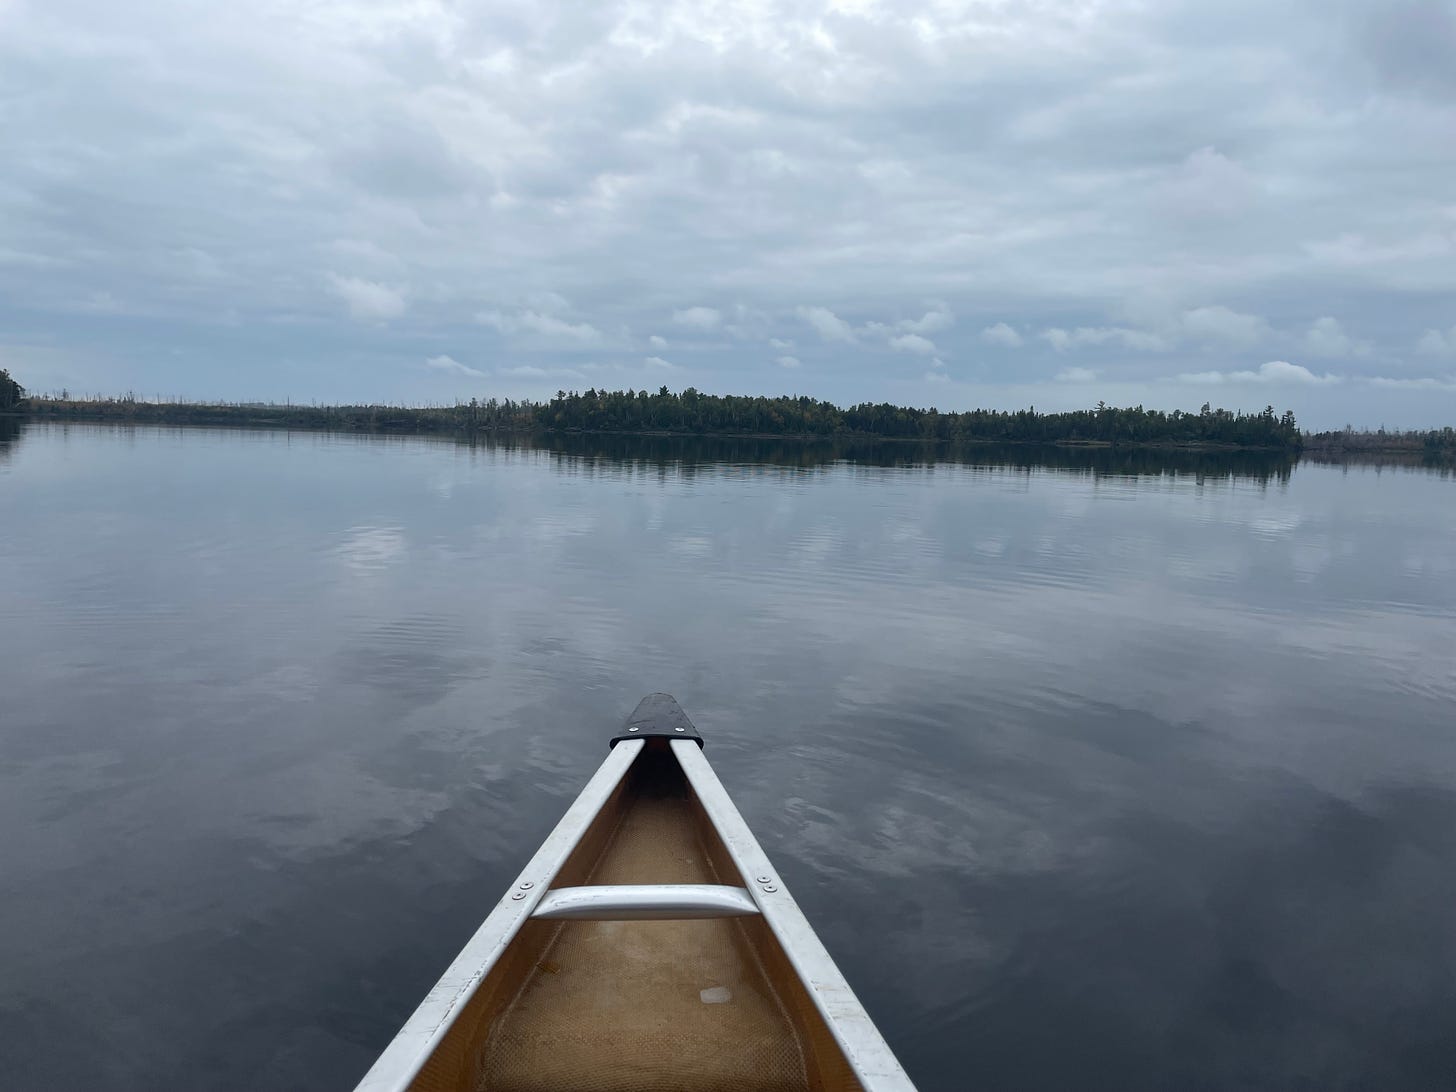 The bow of a canoe points across a still northern lake toward a distant shore of pine trees. The cloudy sky is reflected in the lake.